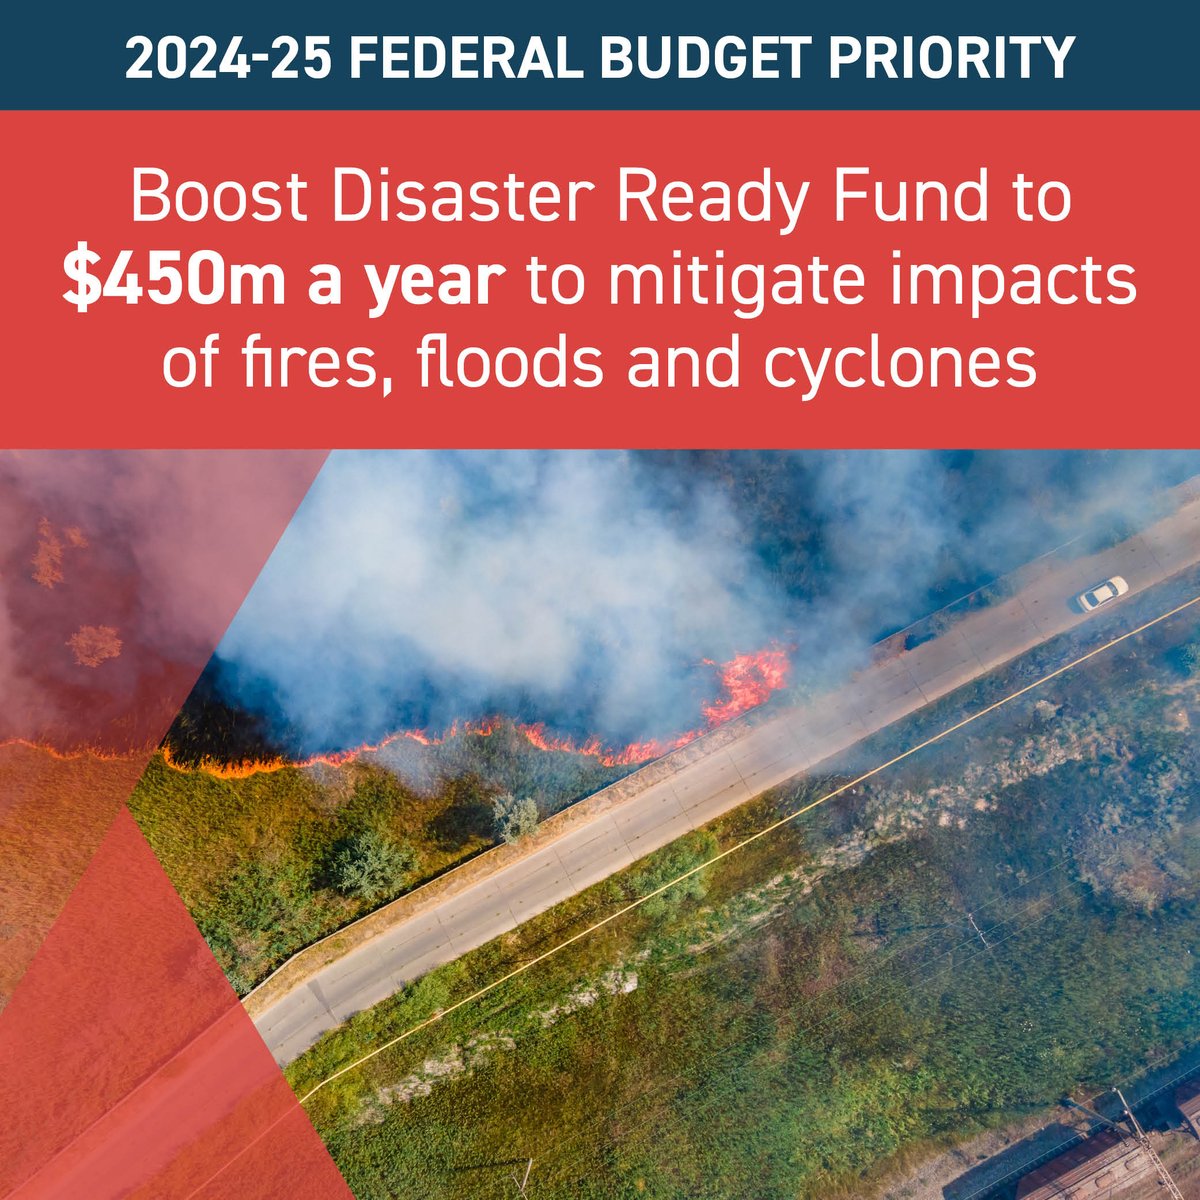 We want the Government to increase the Disaster Ready Fund by $250 million per year to protect #communities from natural #disasters. This will mitigate against the impacts of floods, fires and cyclones and save billions on #recovery each year. More👉 bit.ly/49lZOBR